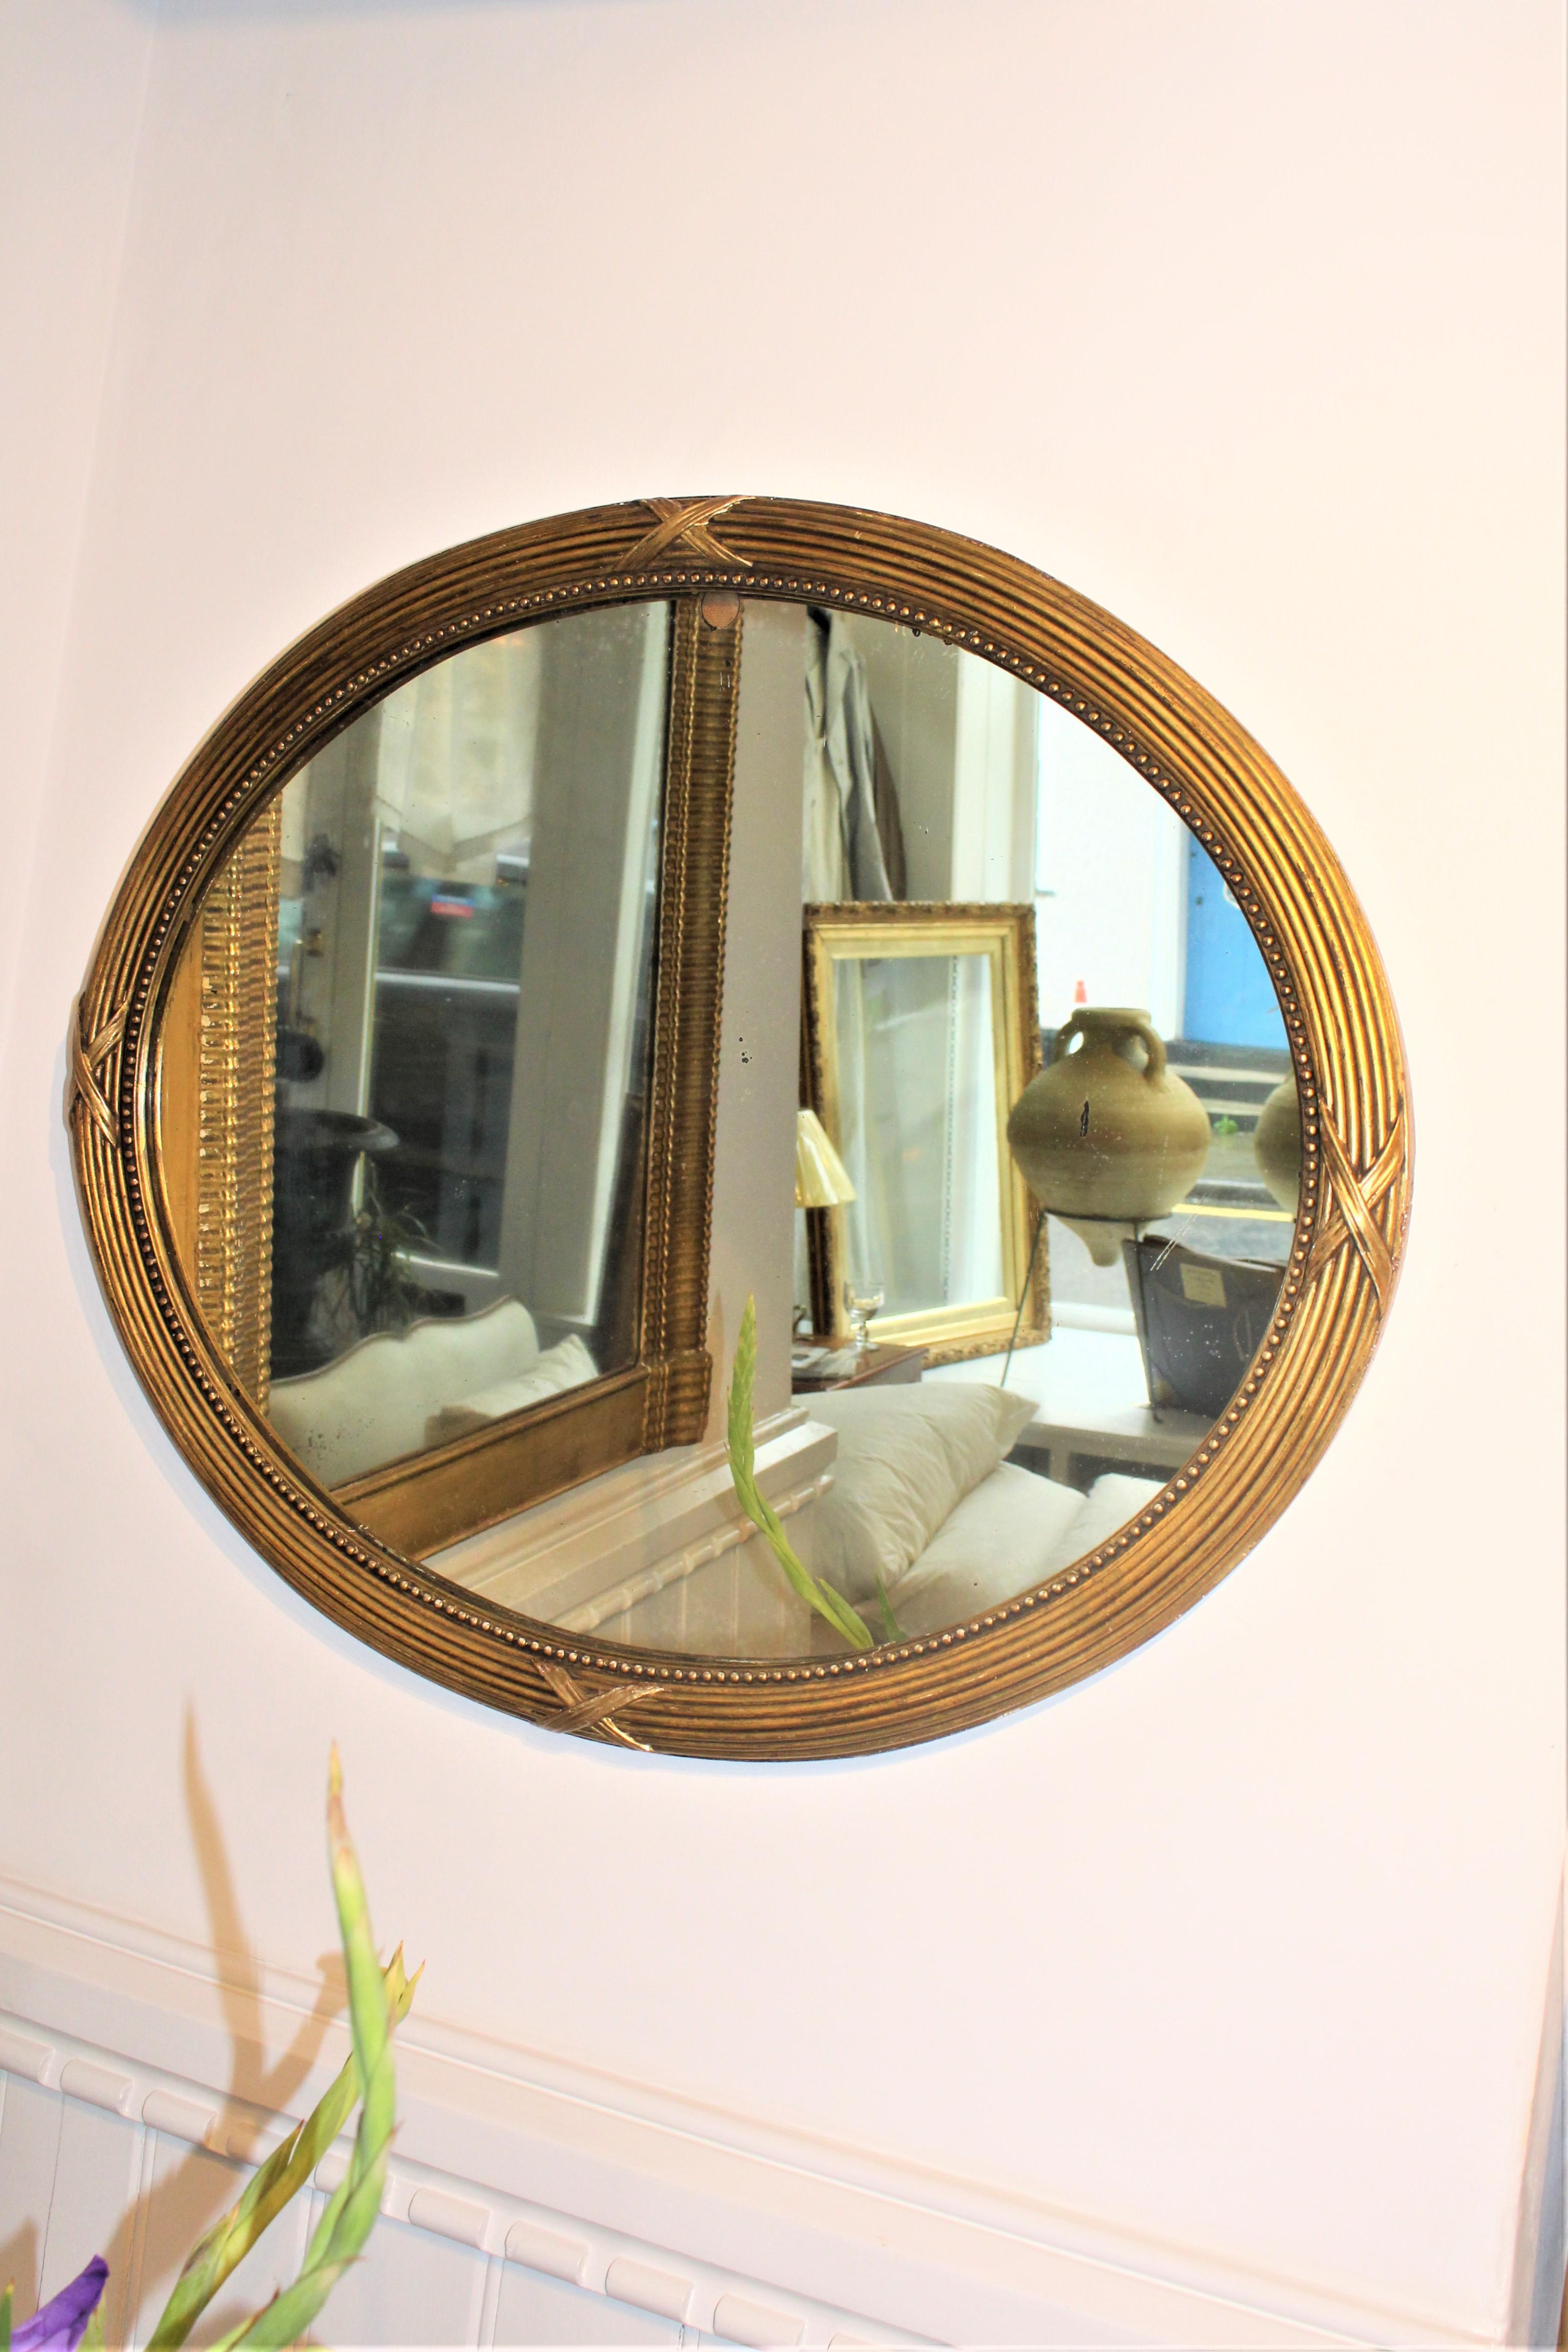 20th Century Oval Art Deco 1930 French Continental Gilt Wall Console Mirror In Good Condition For Sale In Dorking, Surrey